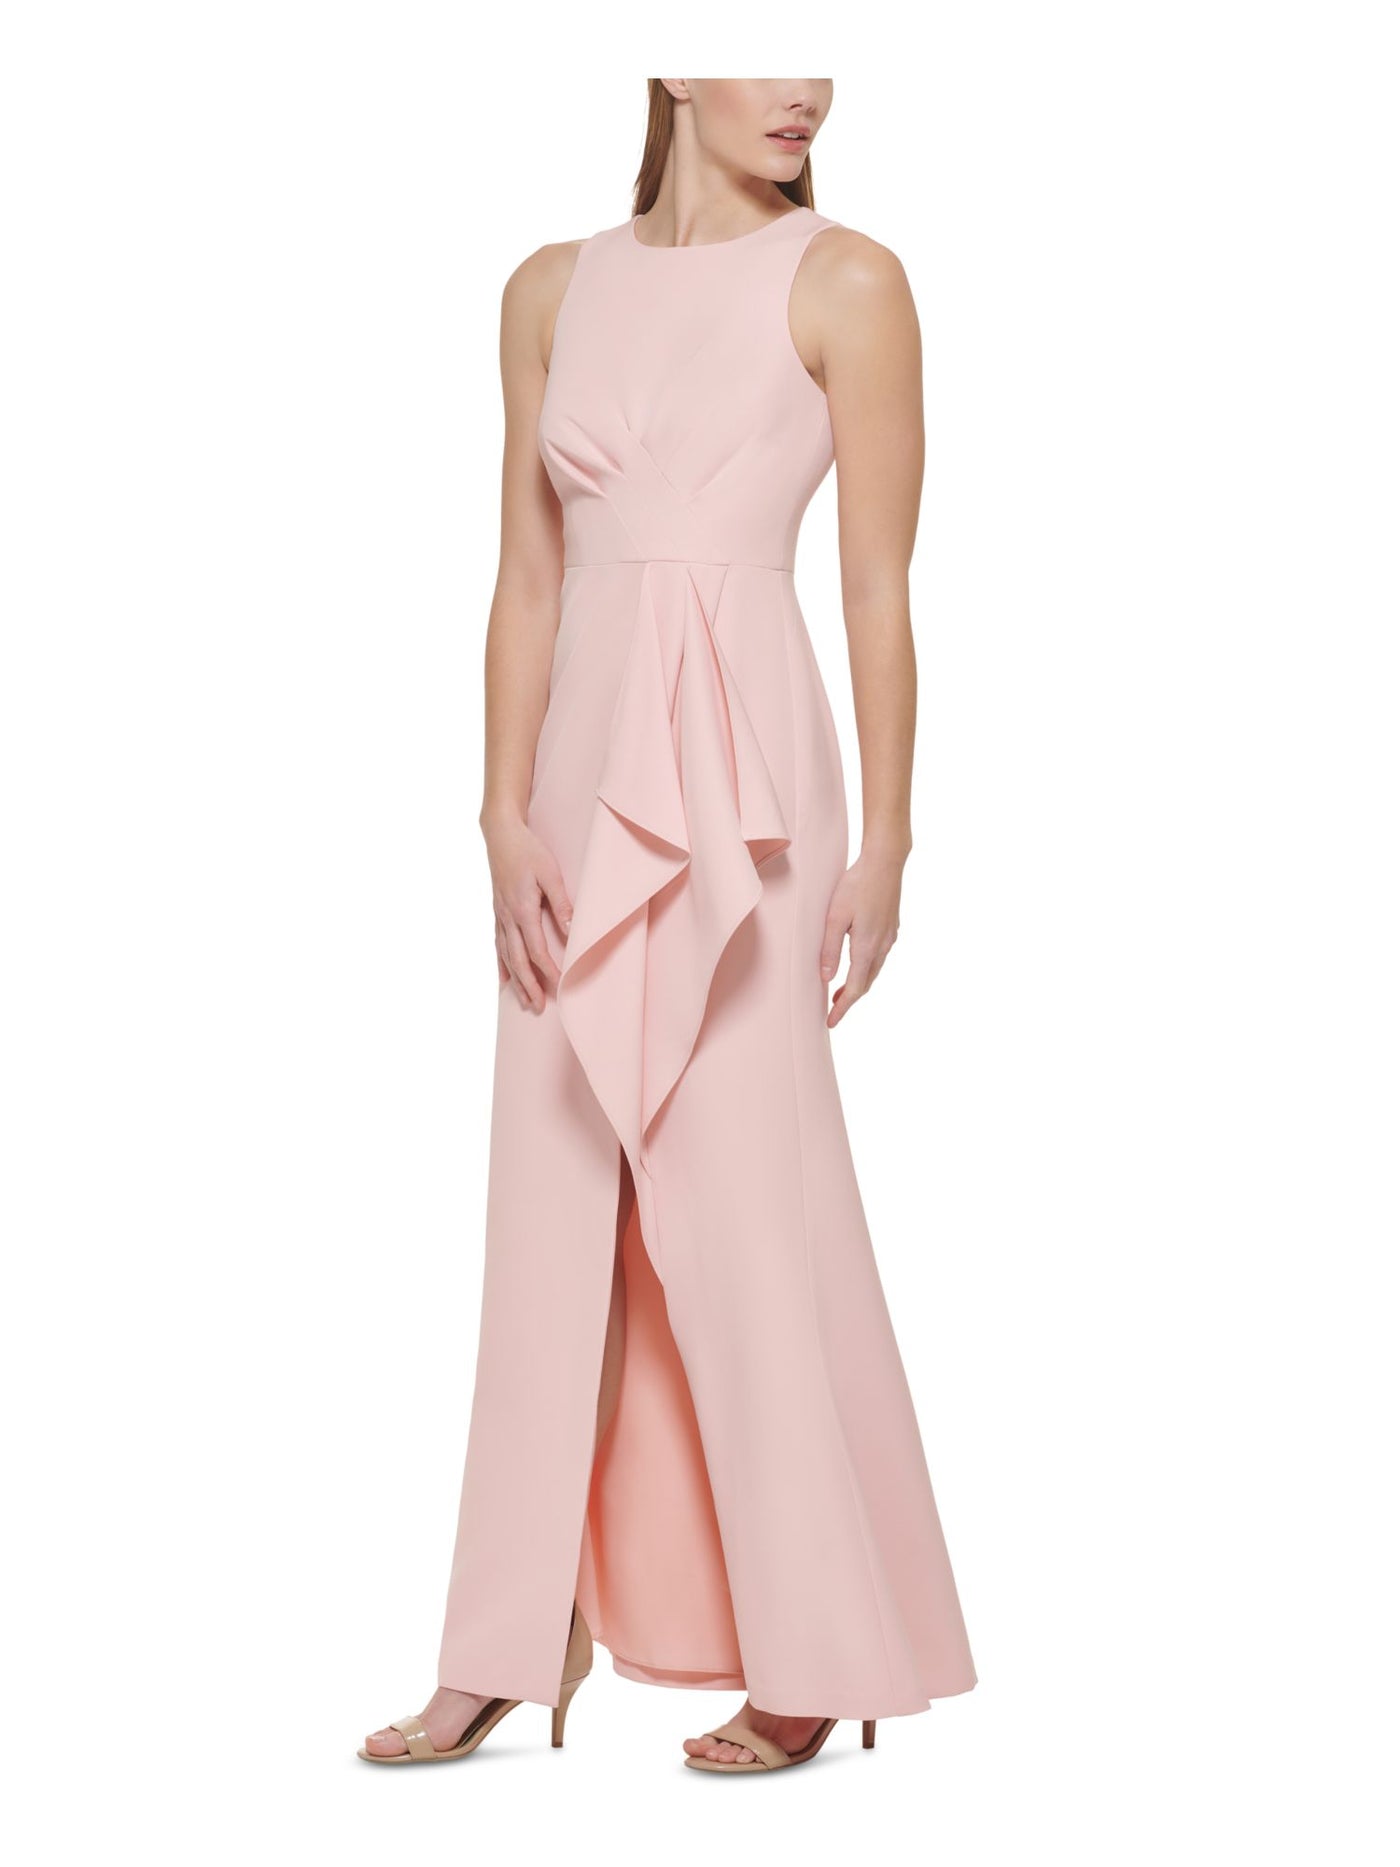 ELIZA J Womens Pink Zippered Ruffled Front Slit Lined Sleeveless Jewel Neck Full-Length Formal Gown Dress 4